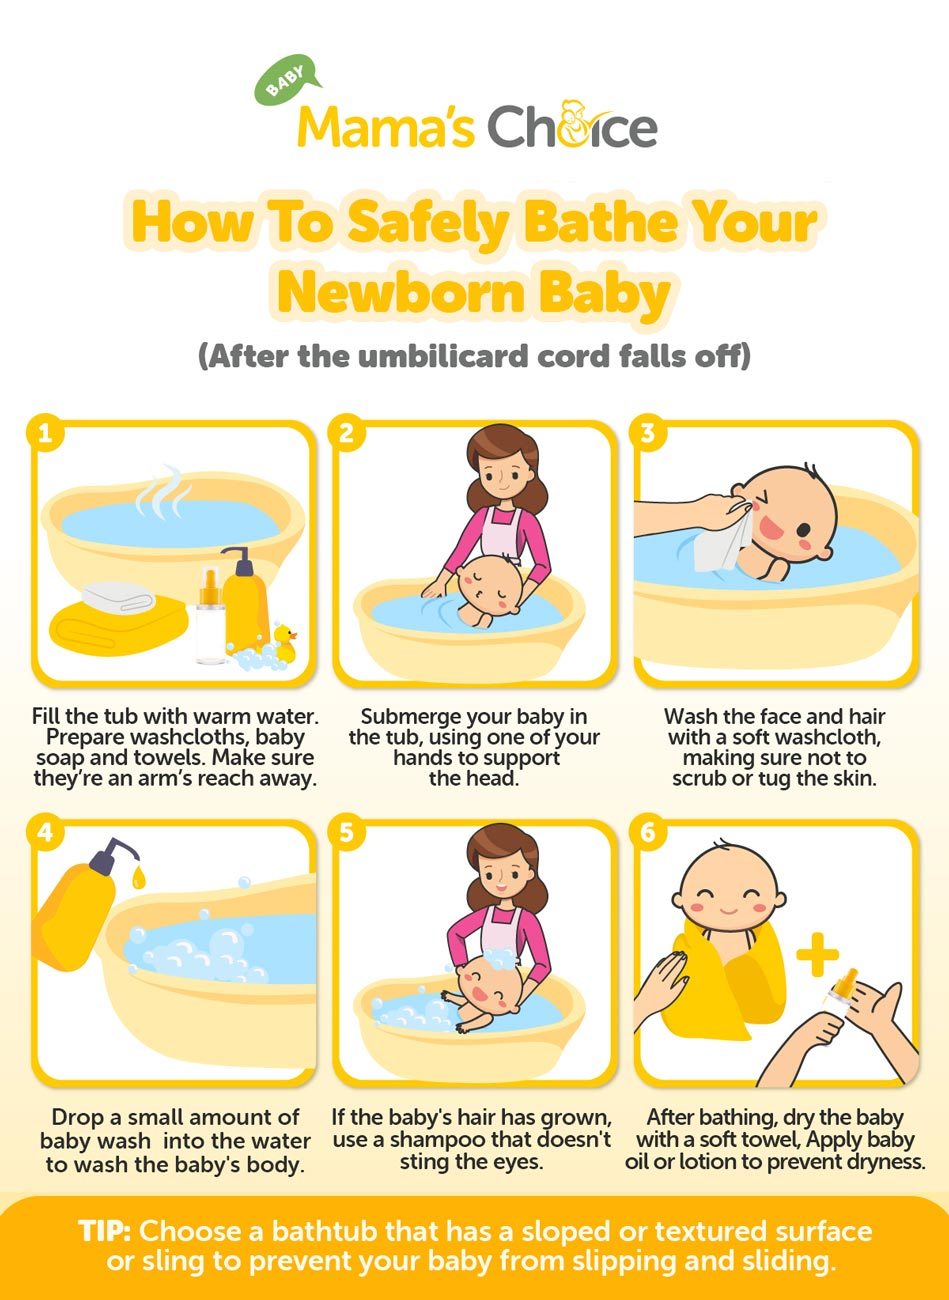 How to bathe a newborn baby once the umbilical cord has fallen off